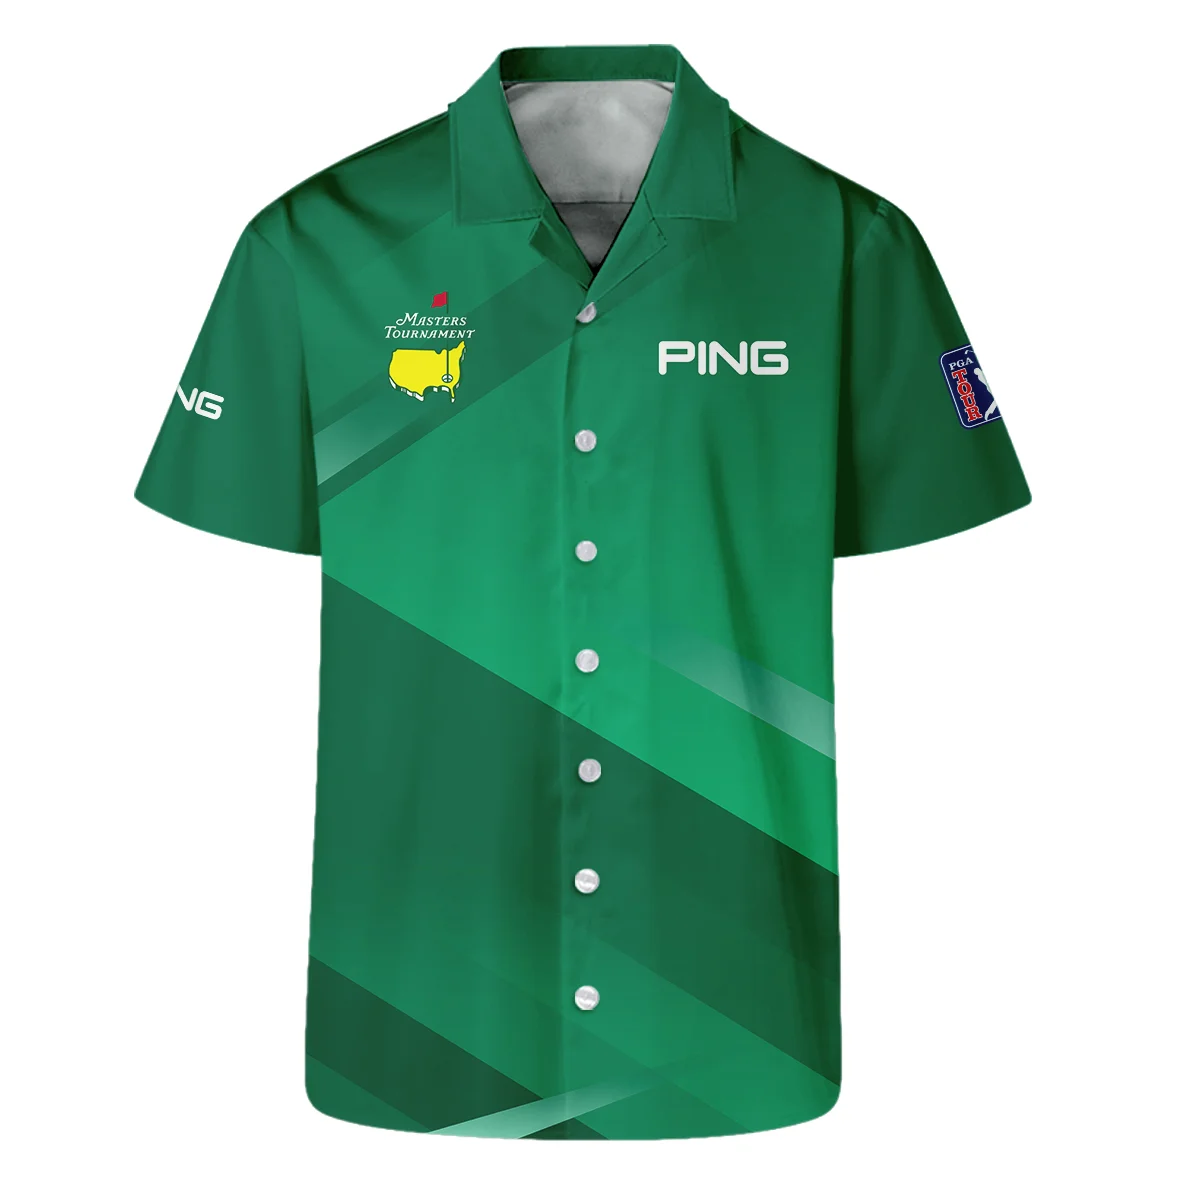 Ping Masters Tournament Golf Bomber Jacket Green Gradient Pattern Sports All Over Print Bomber Jacket